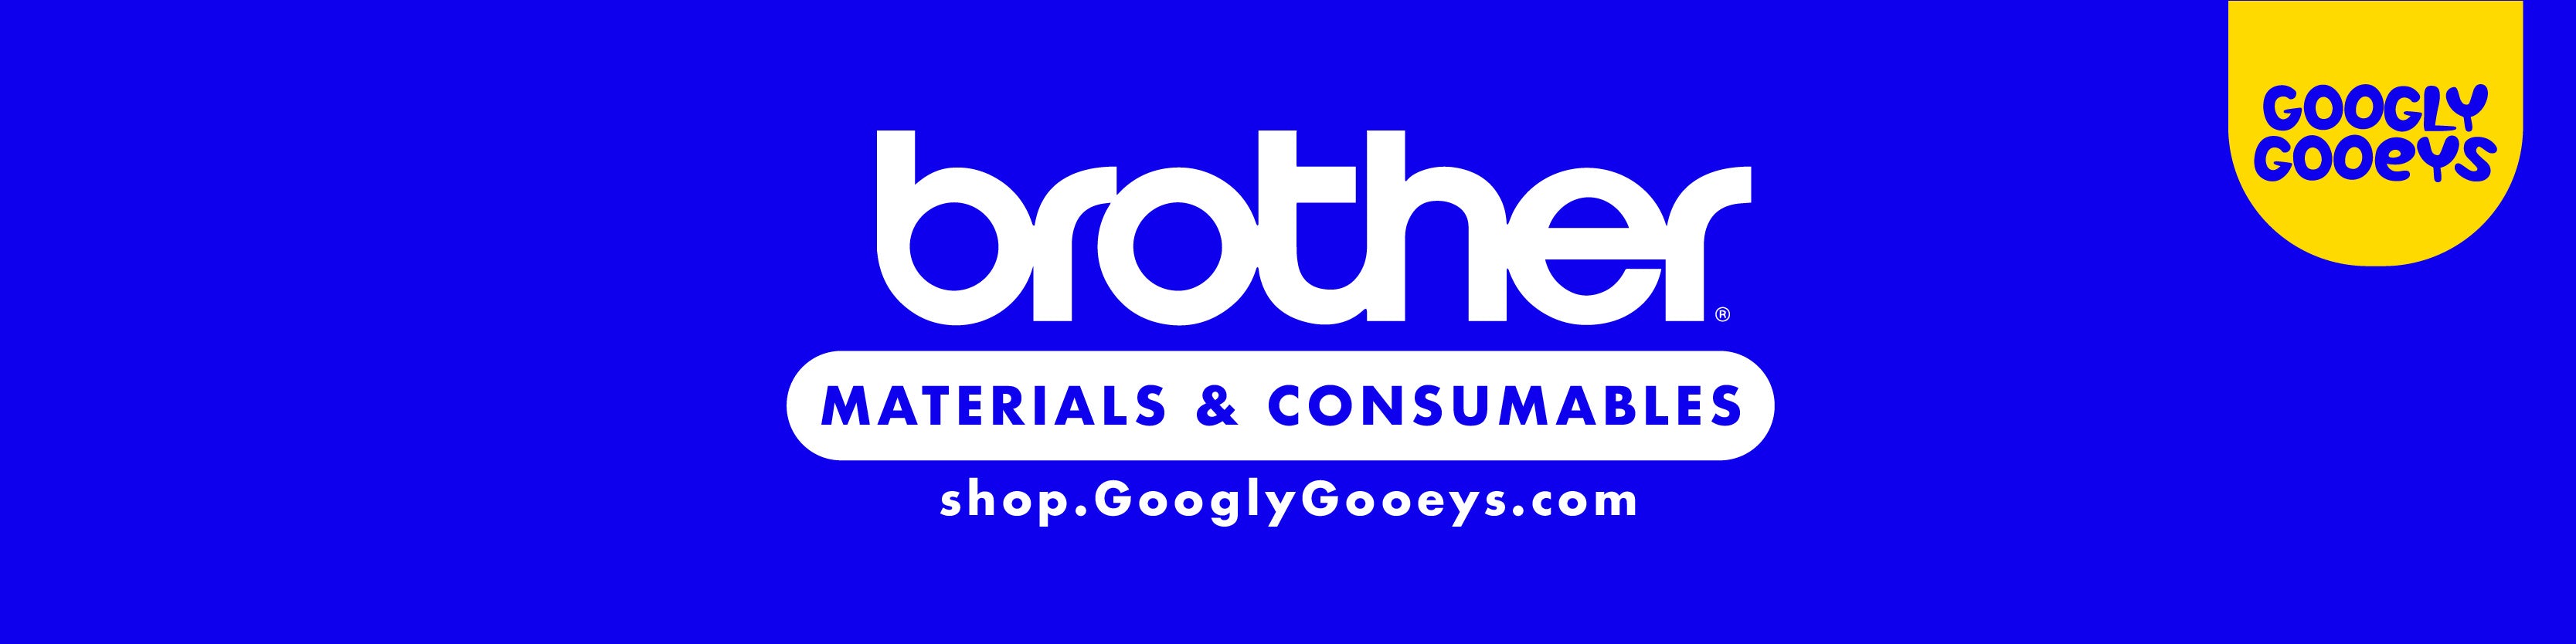 Googly Gooeys Shop -Brother Materials and Consumables